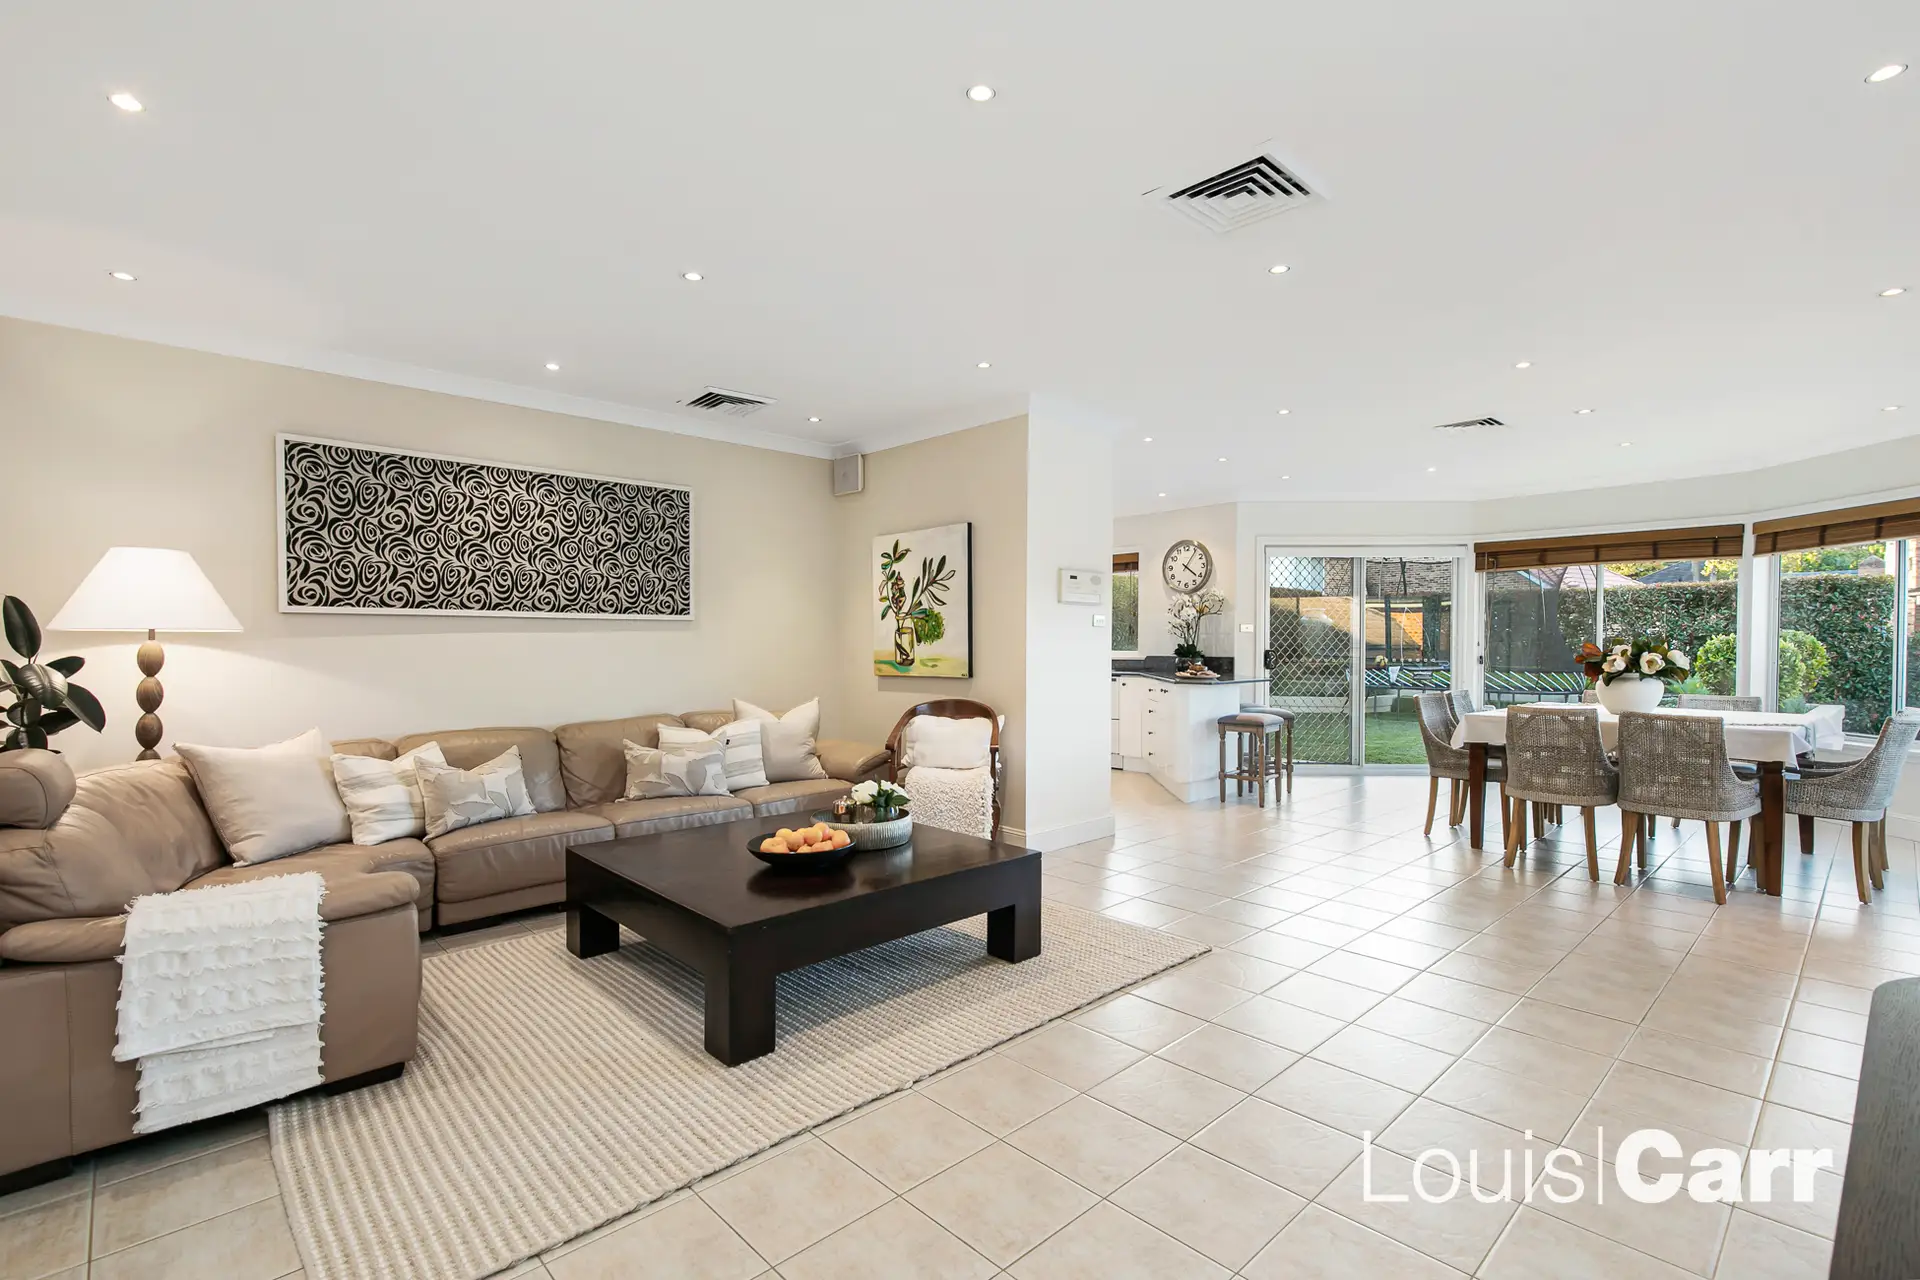 Photo #5: 12 Kambah Place, West Pennant Hills - Sold by Louis Carr Real Estate